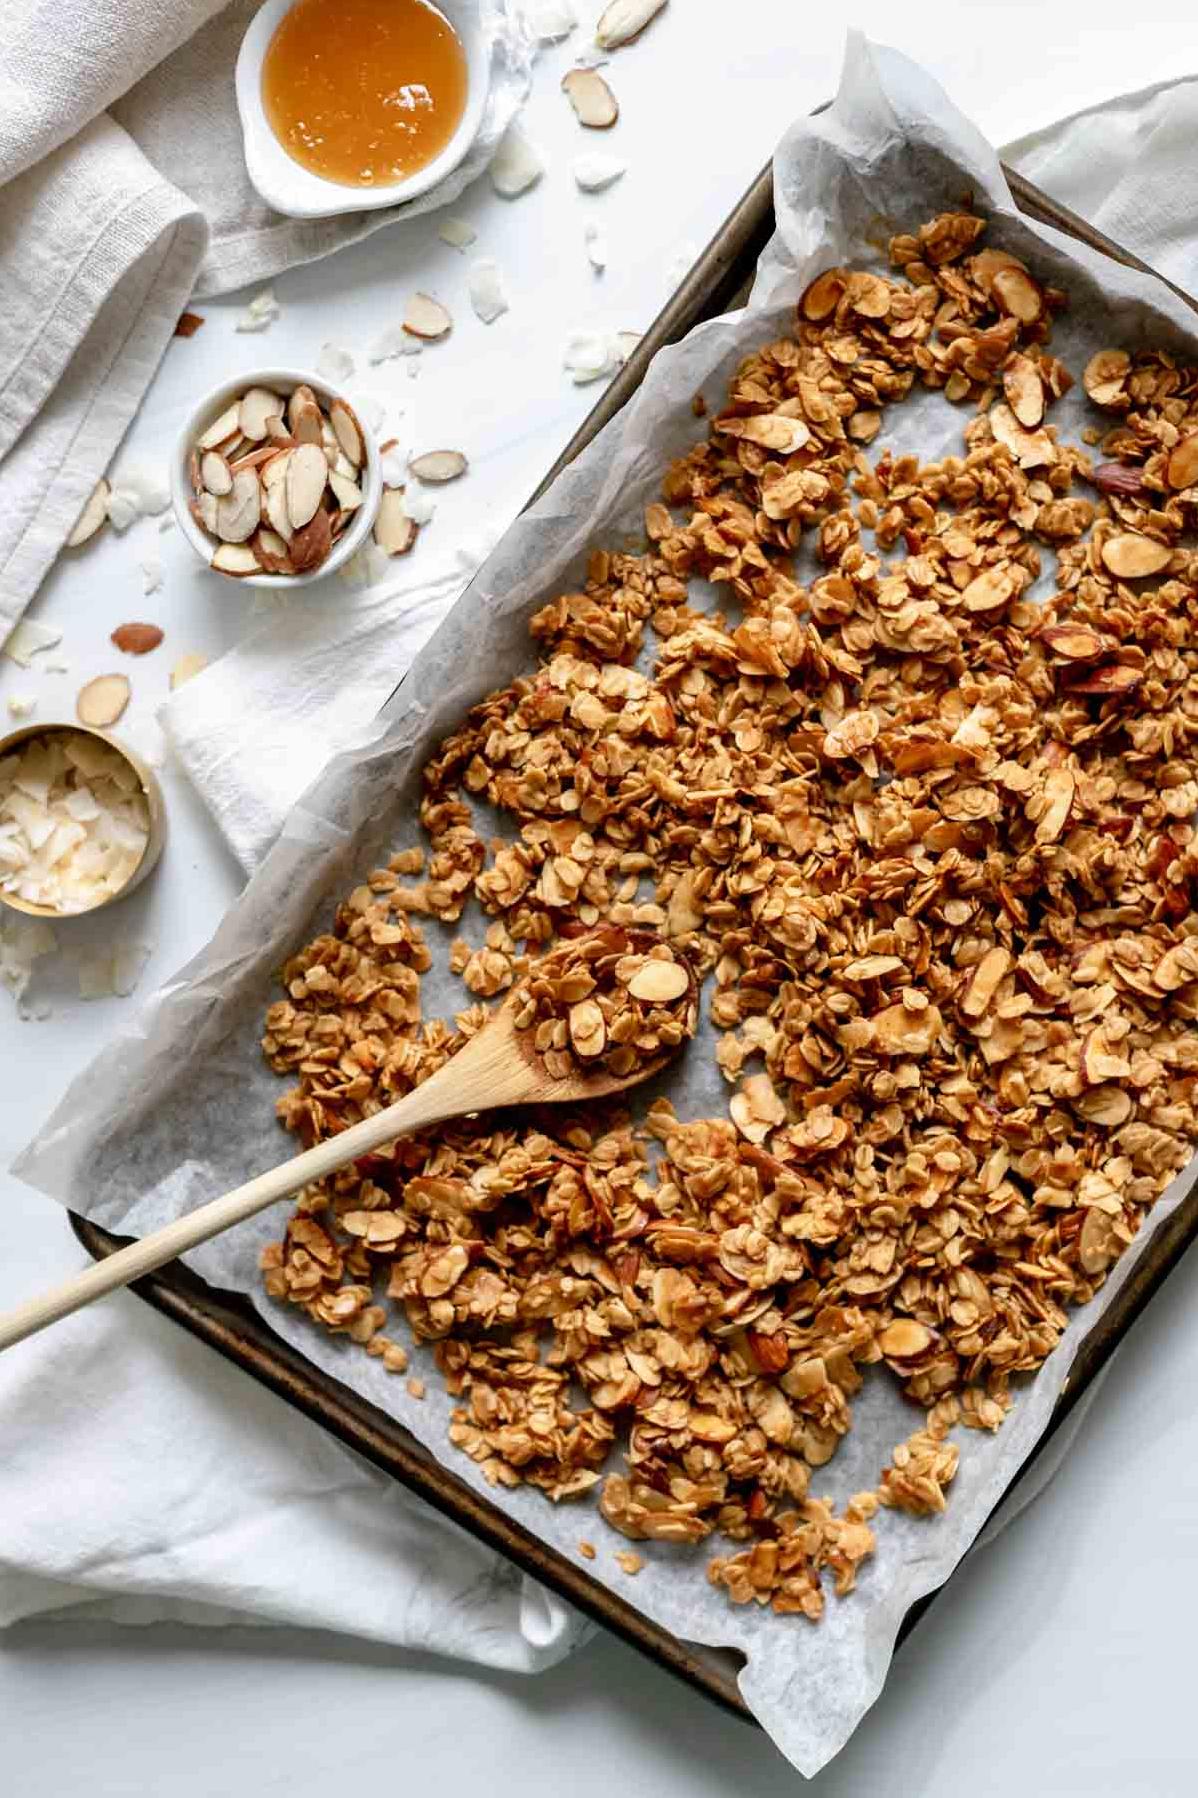  Sweeten up your mornings with this honey-kissed granola.